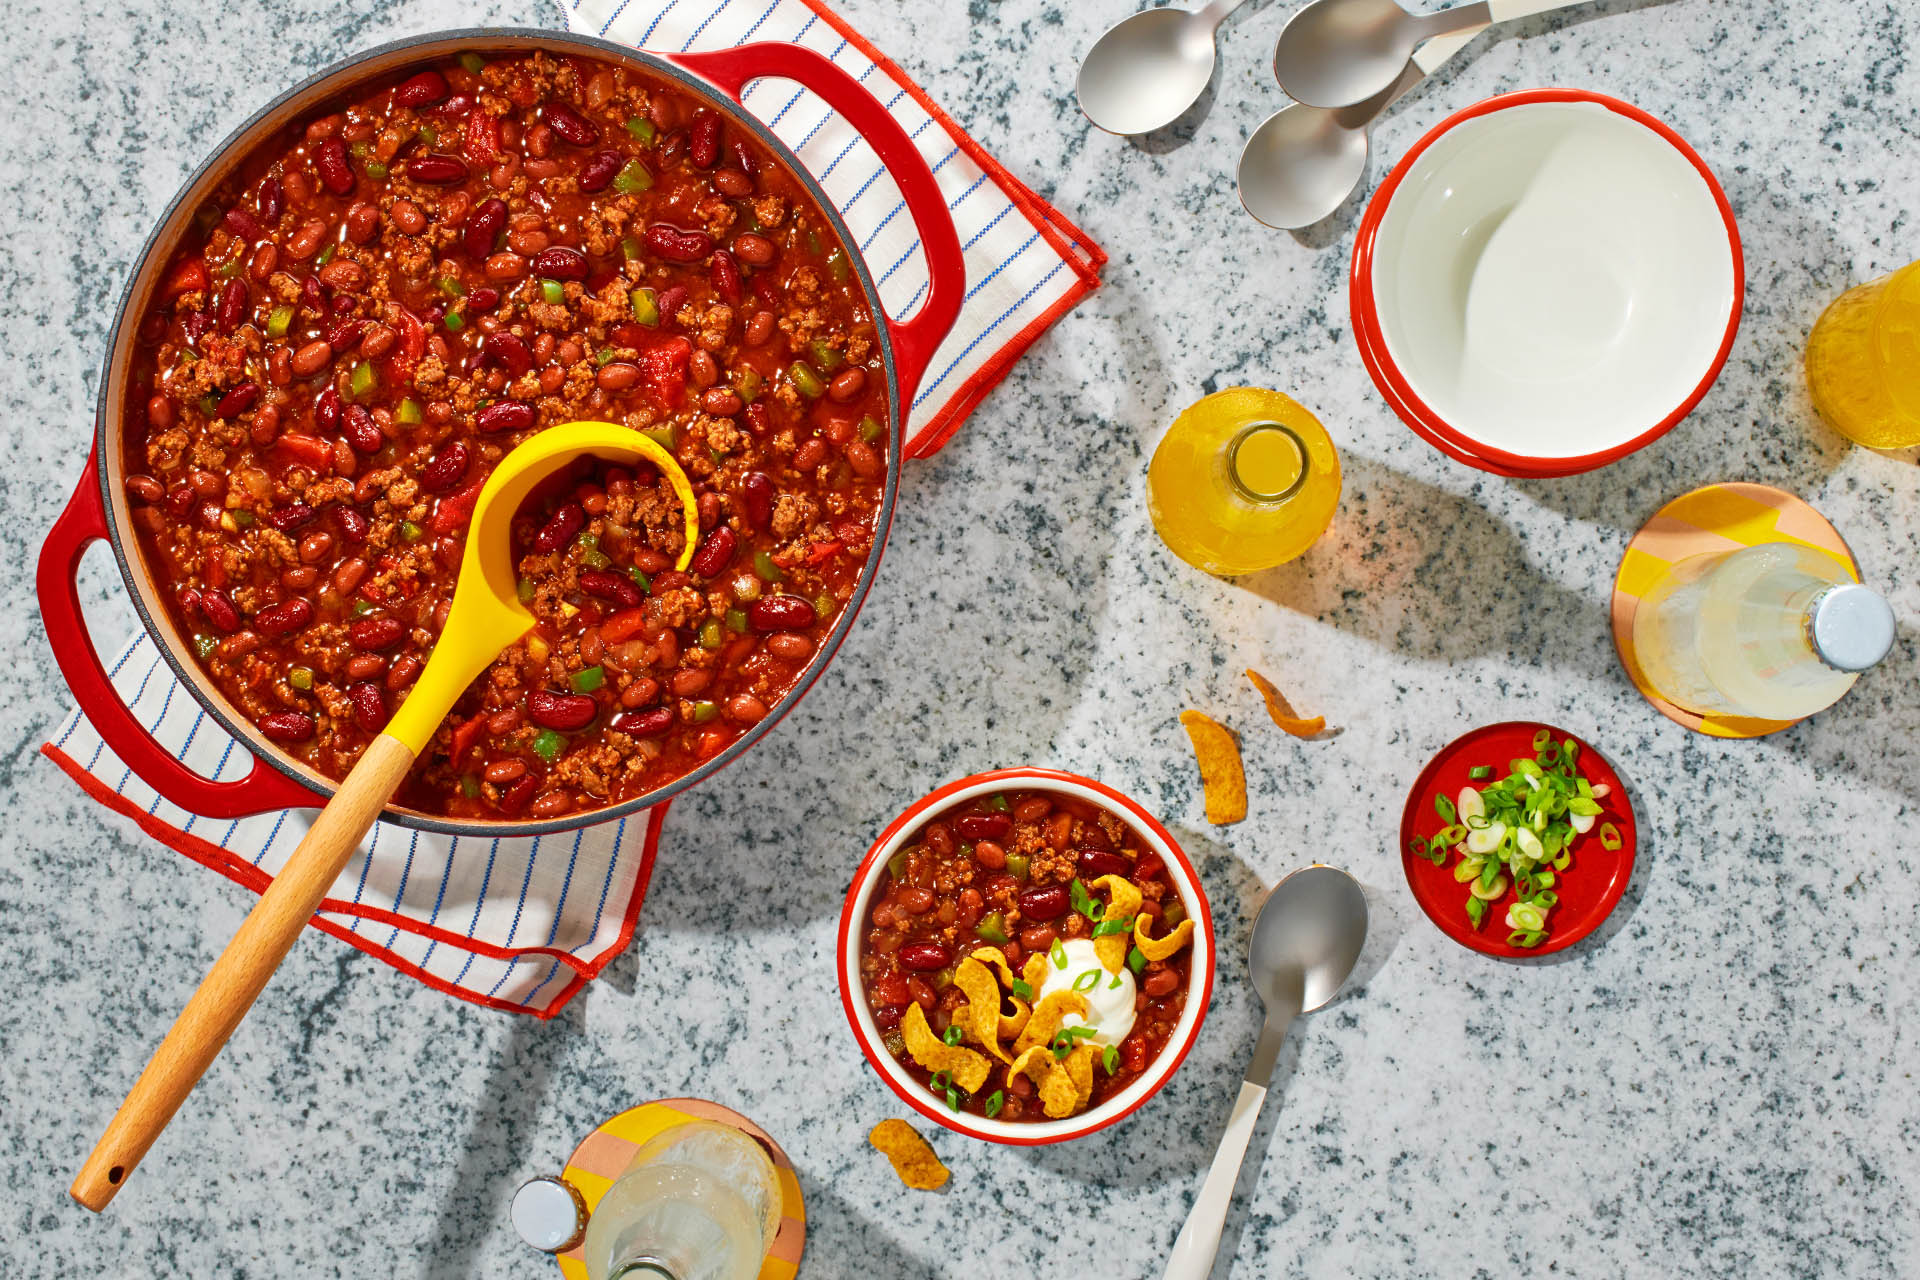 Overhead view of a big pot of chili on a table alongside a bowl of chili, drinks and silverware.